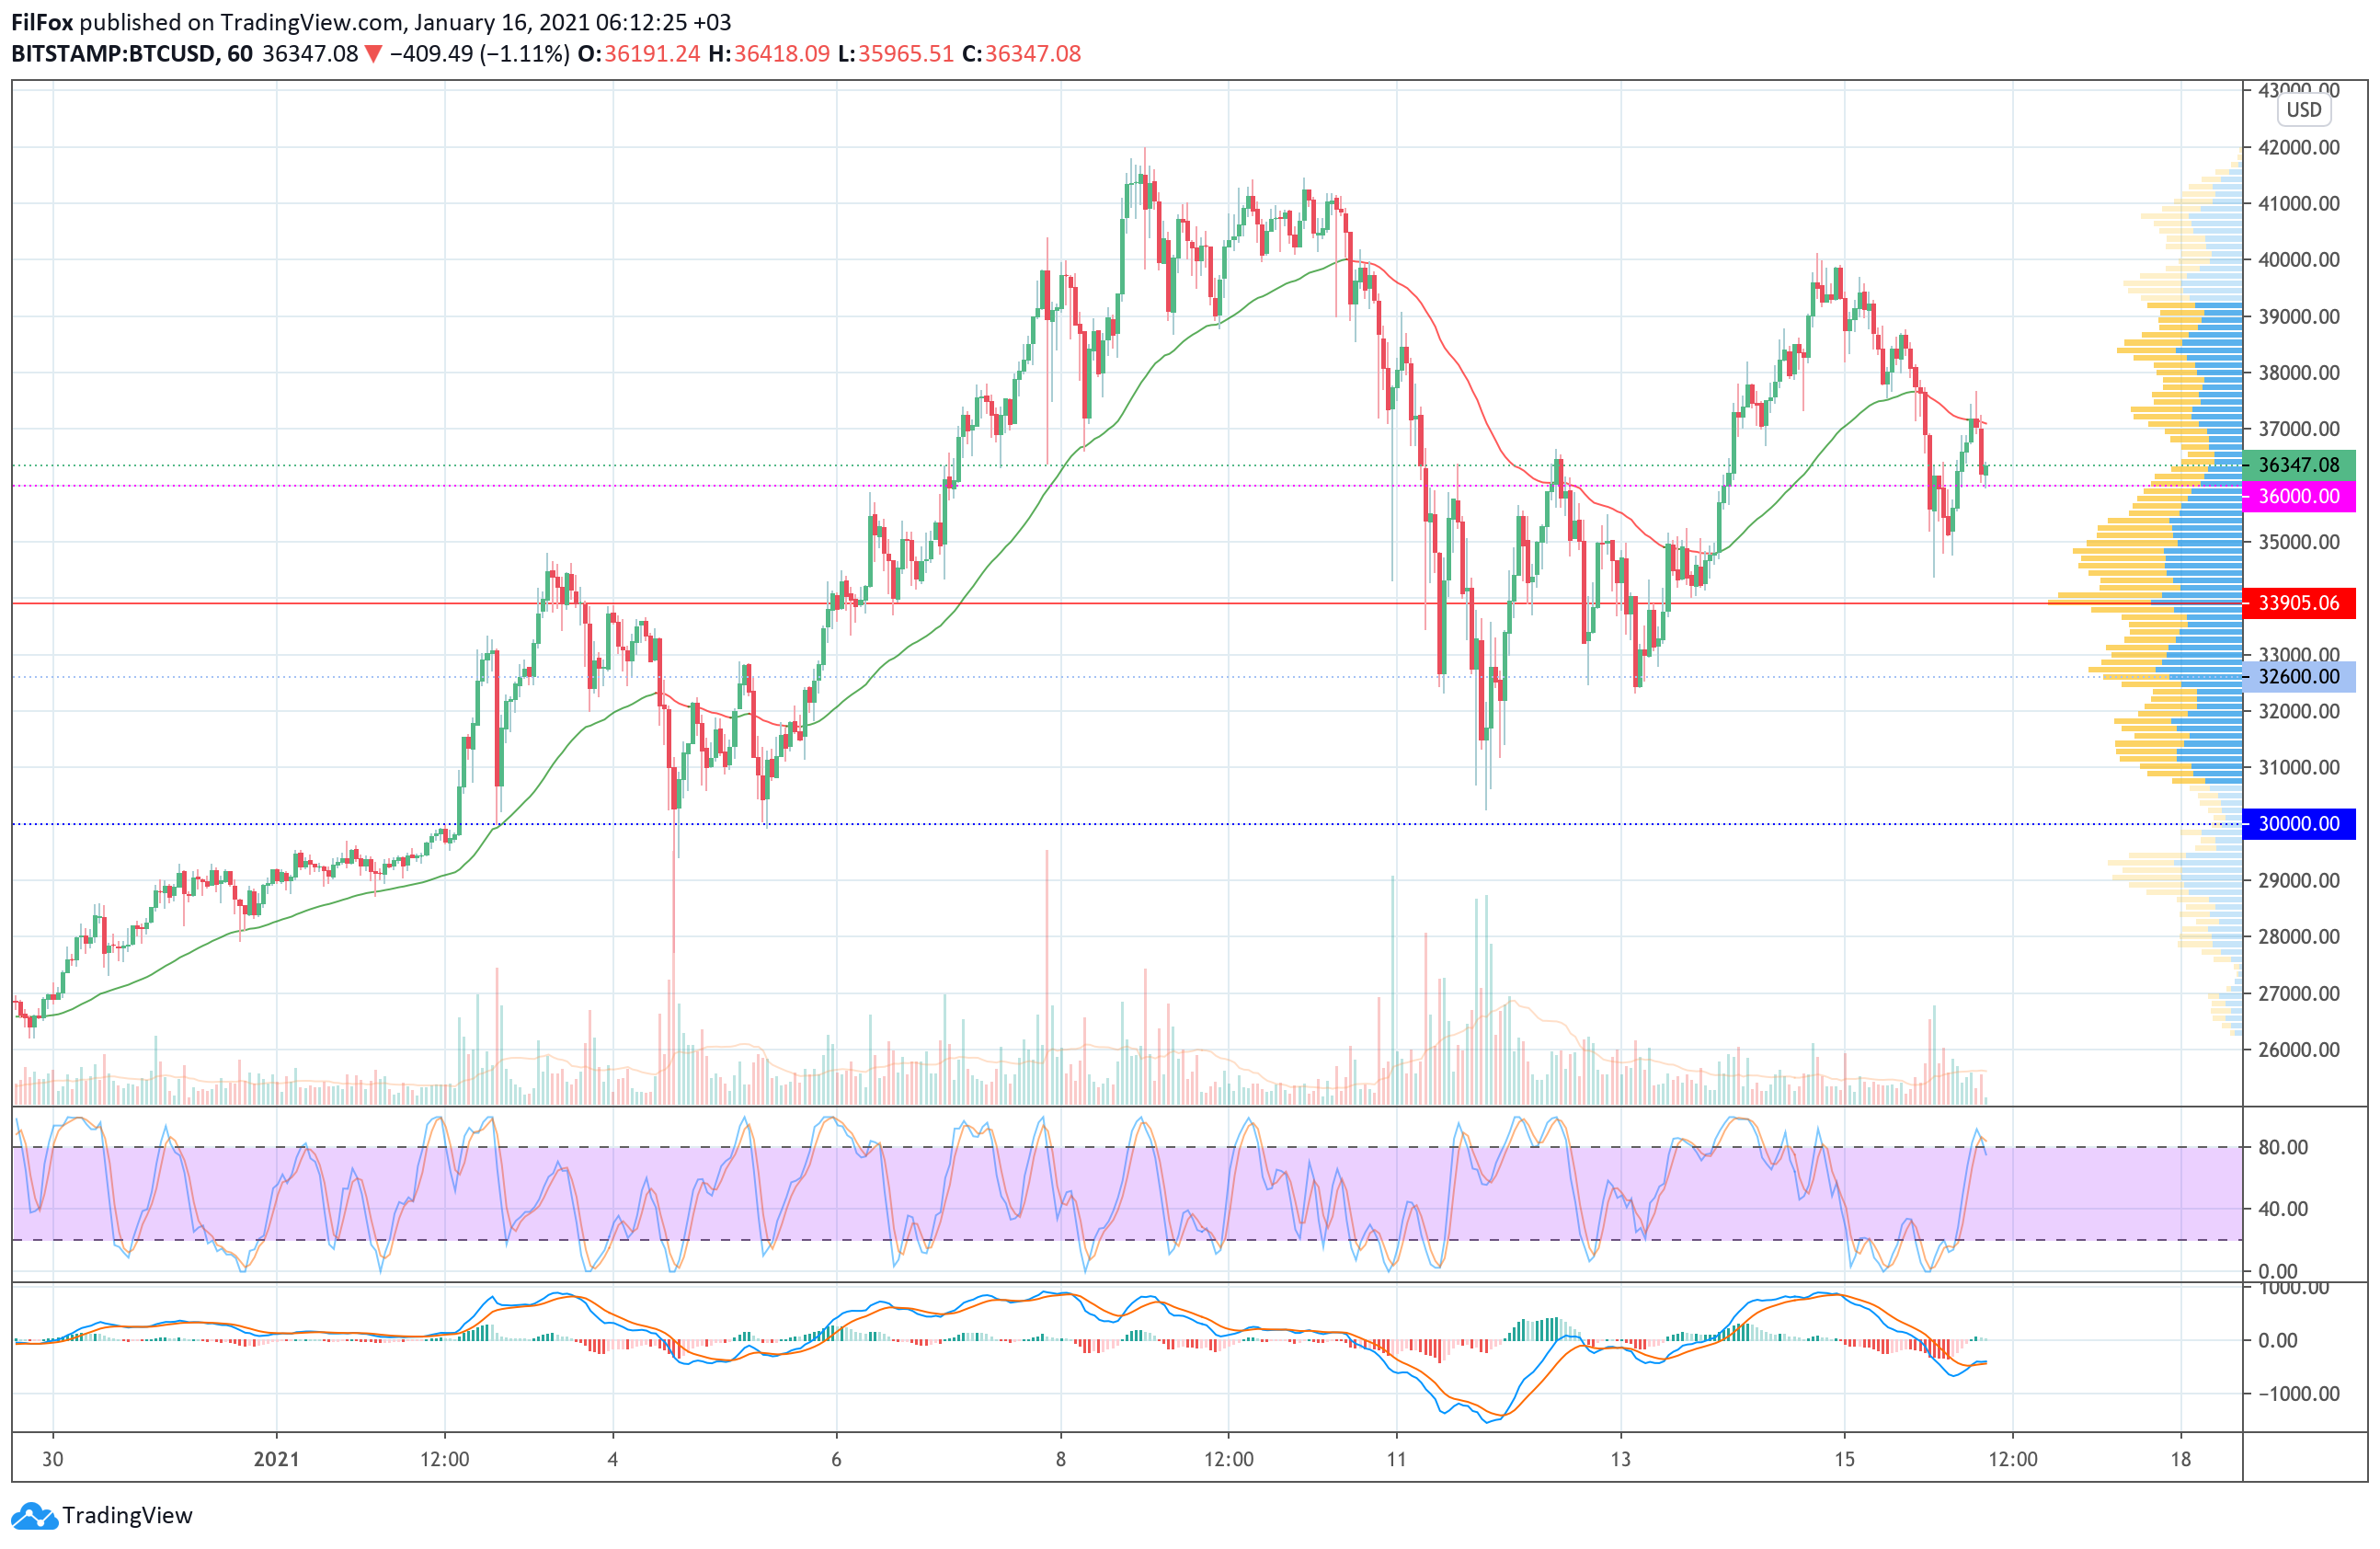 Analysis of prices for Bitcoin, Ethereum, Ripple for 01/16/2021